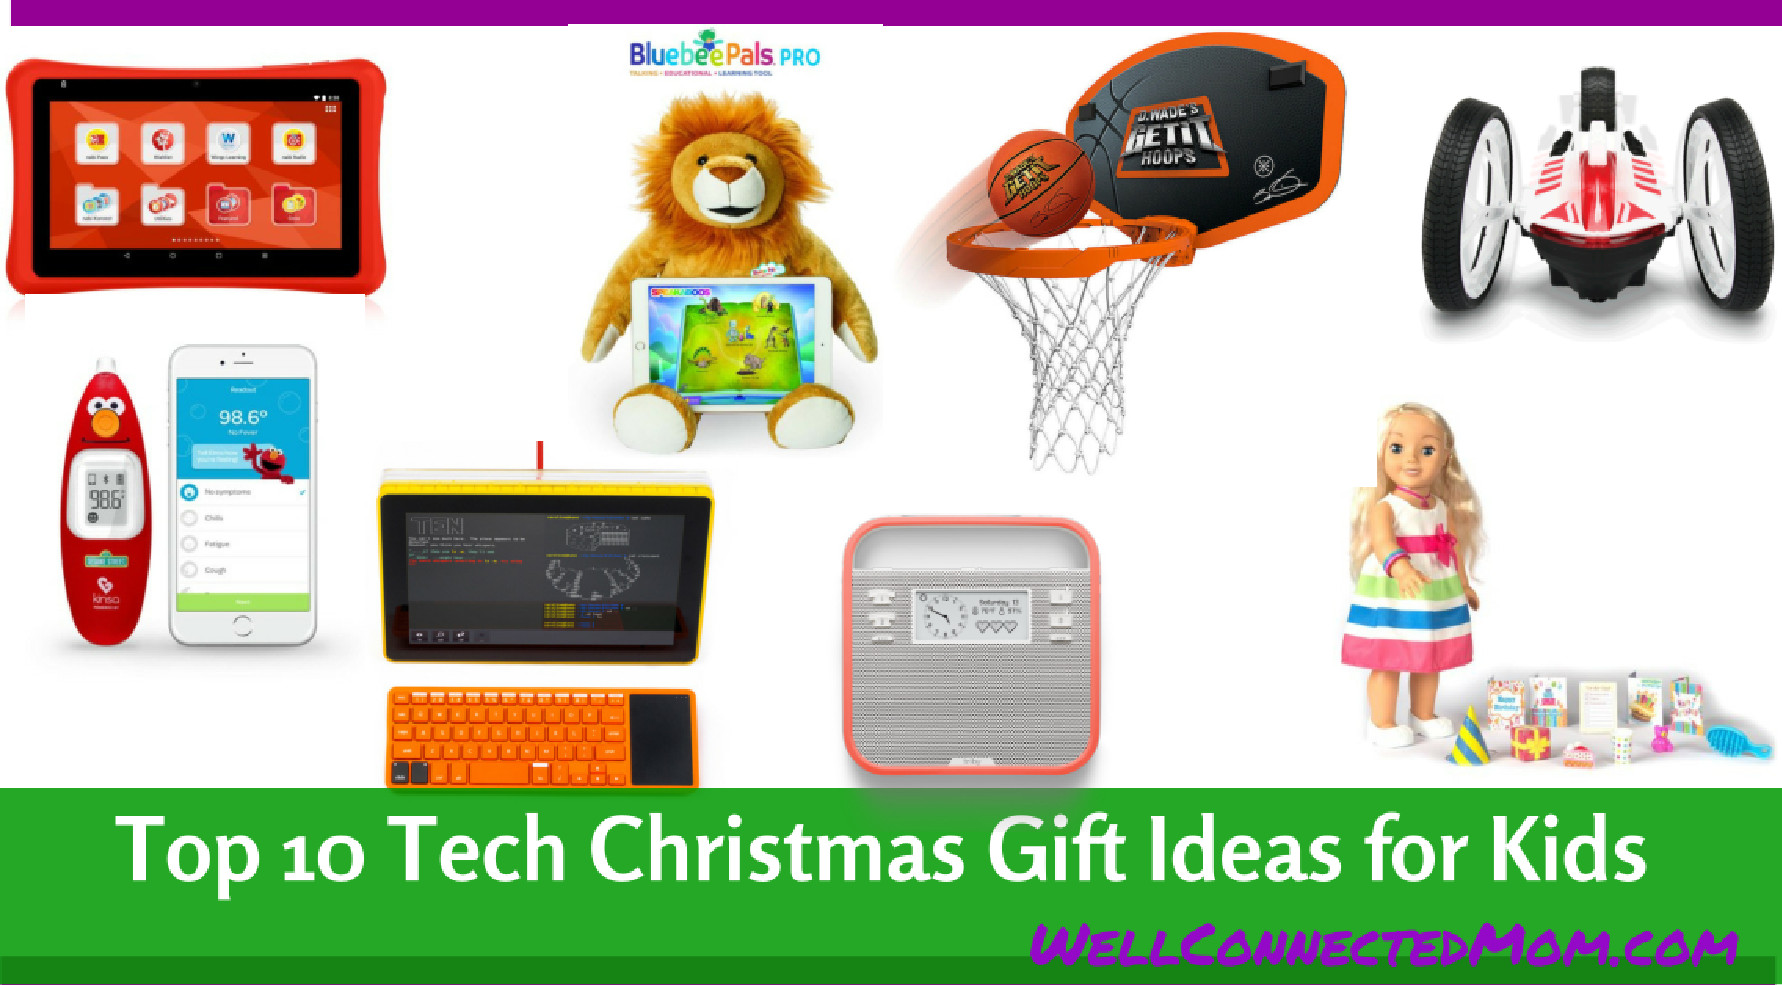 Top Gift Ideas For Kids
 Top 10 Tech Christmas Gift Ideas for Kids The Well